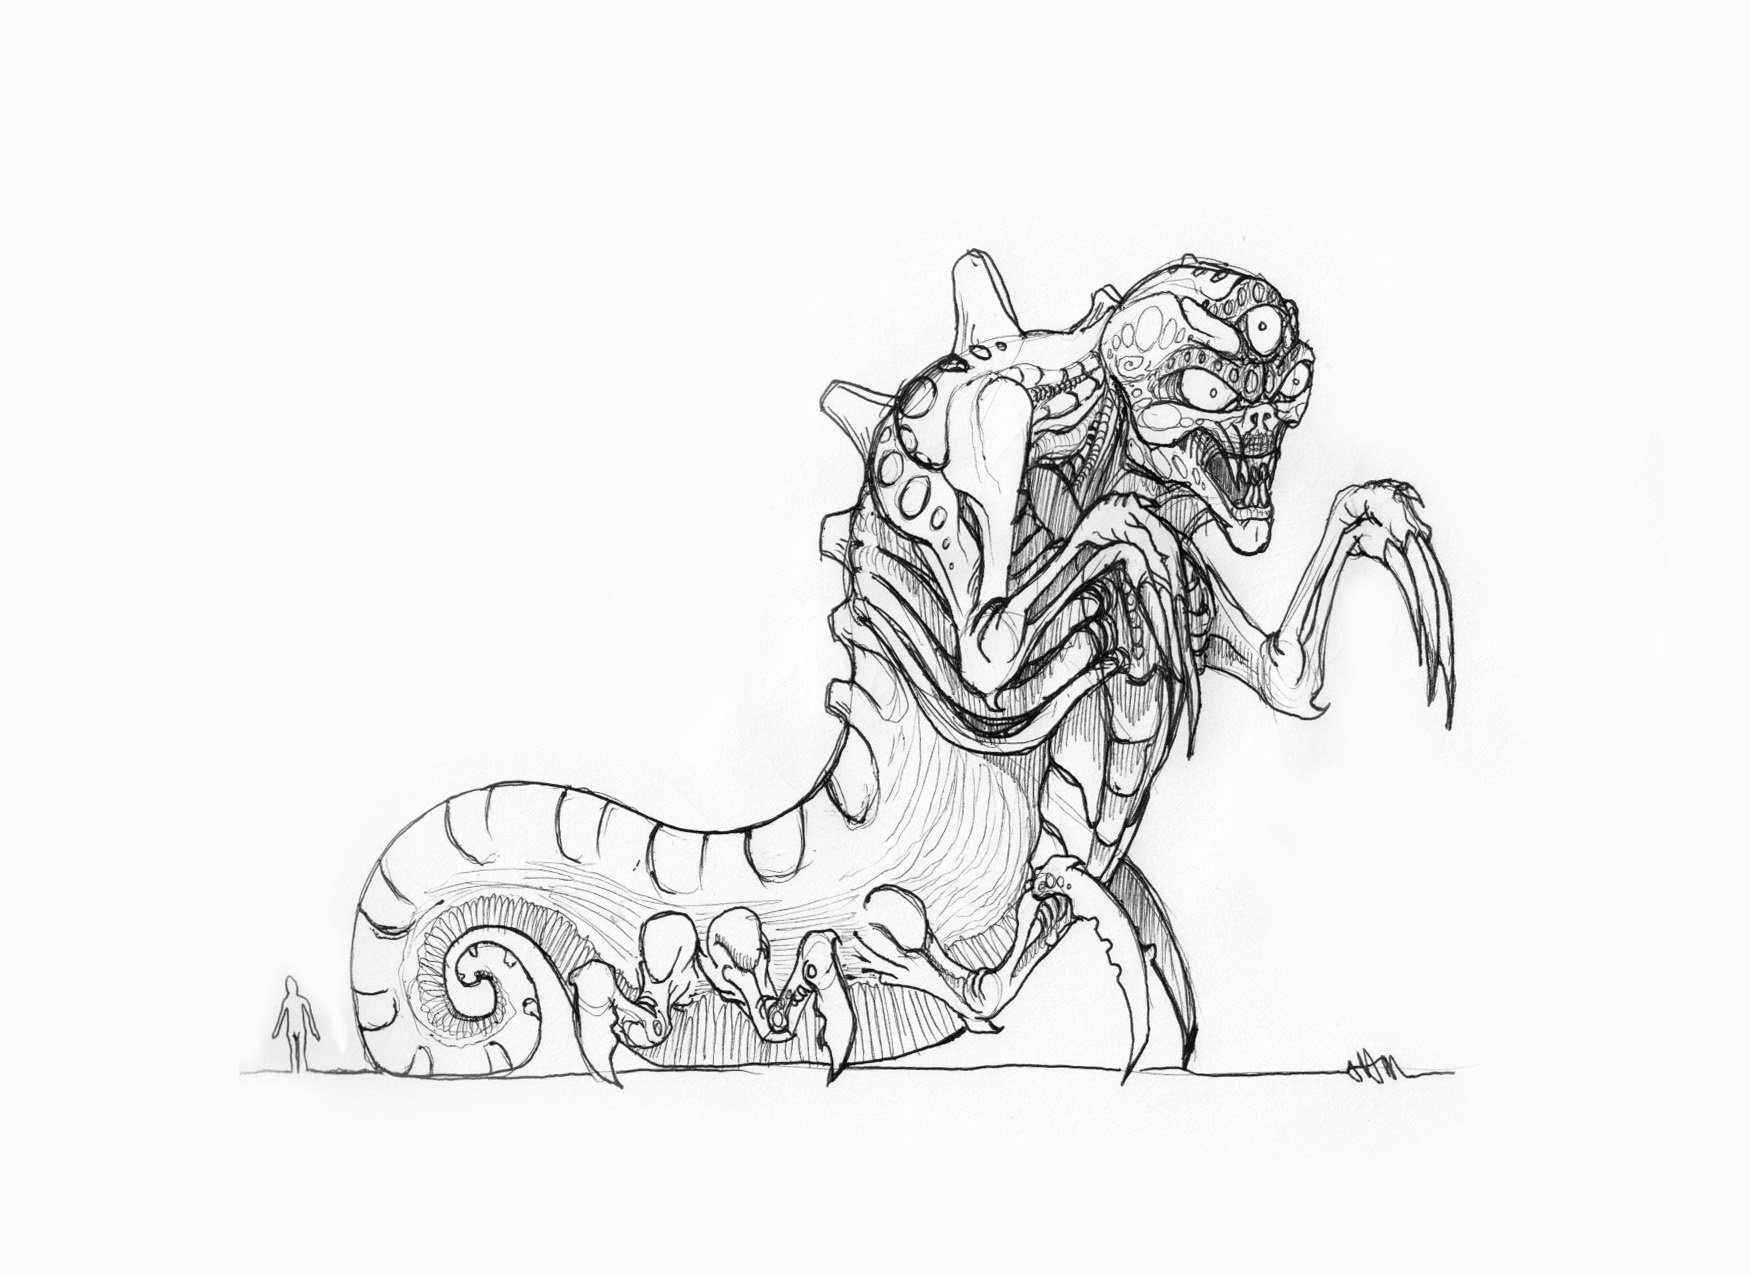 1_15_2013_Monster_to_scale